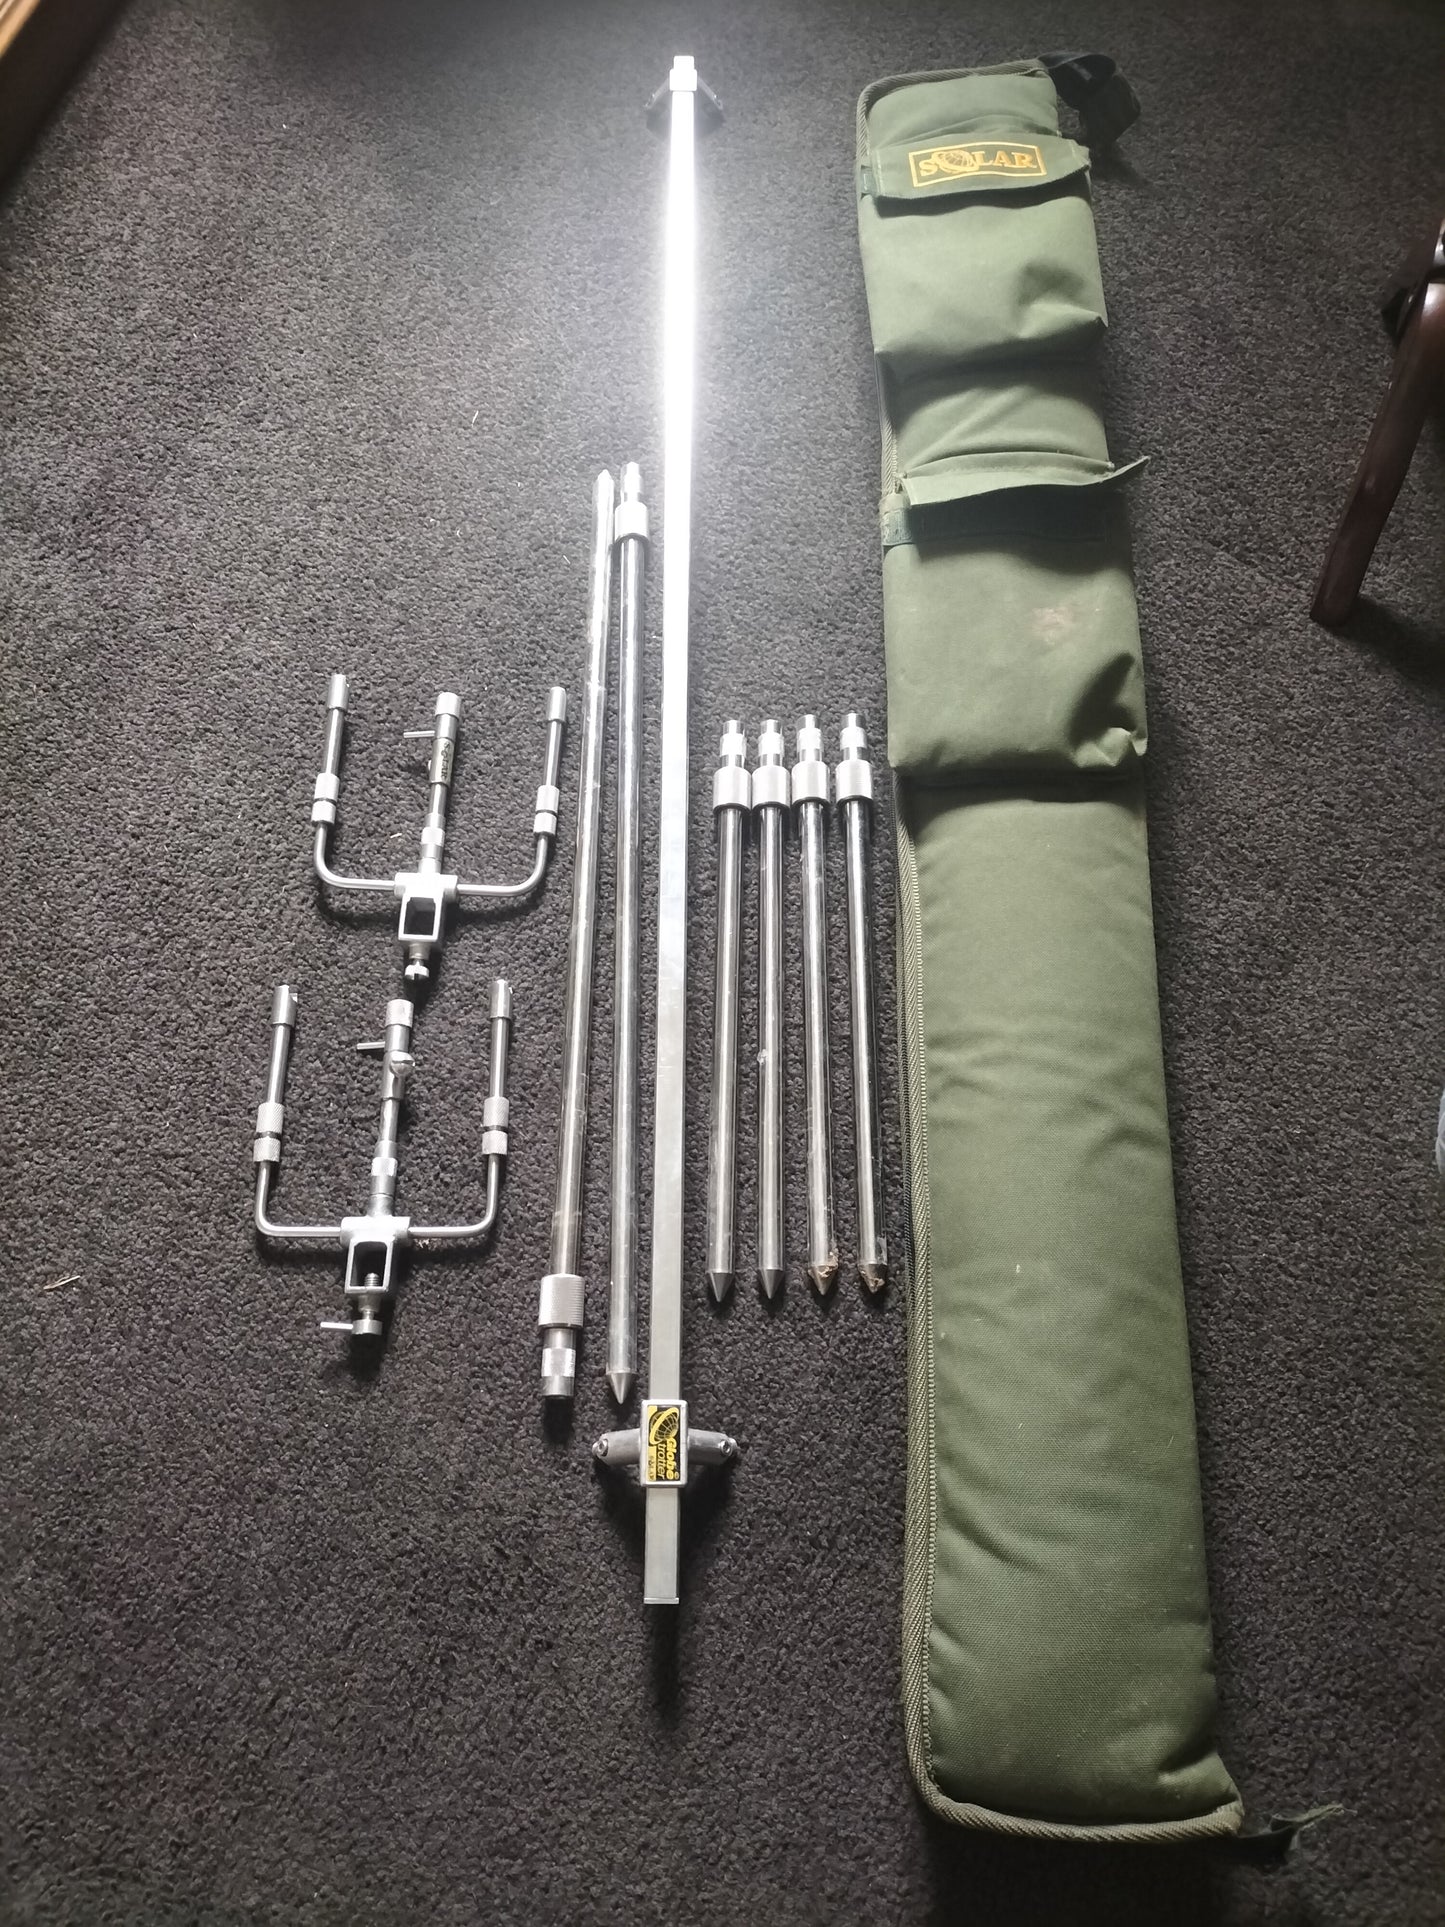 Solar Globetrotter Original Rod Pod Comes with 2 Triposts and Extras Used